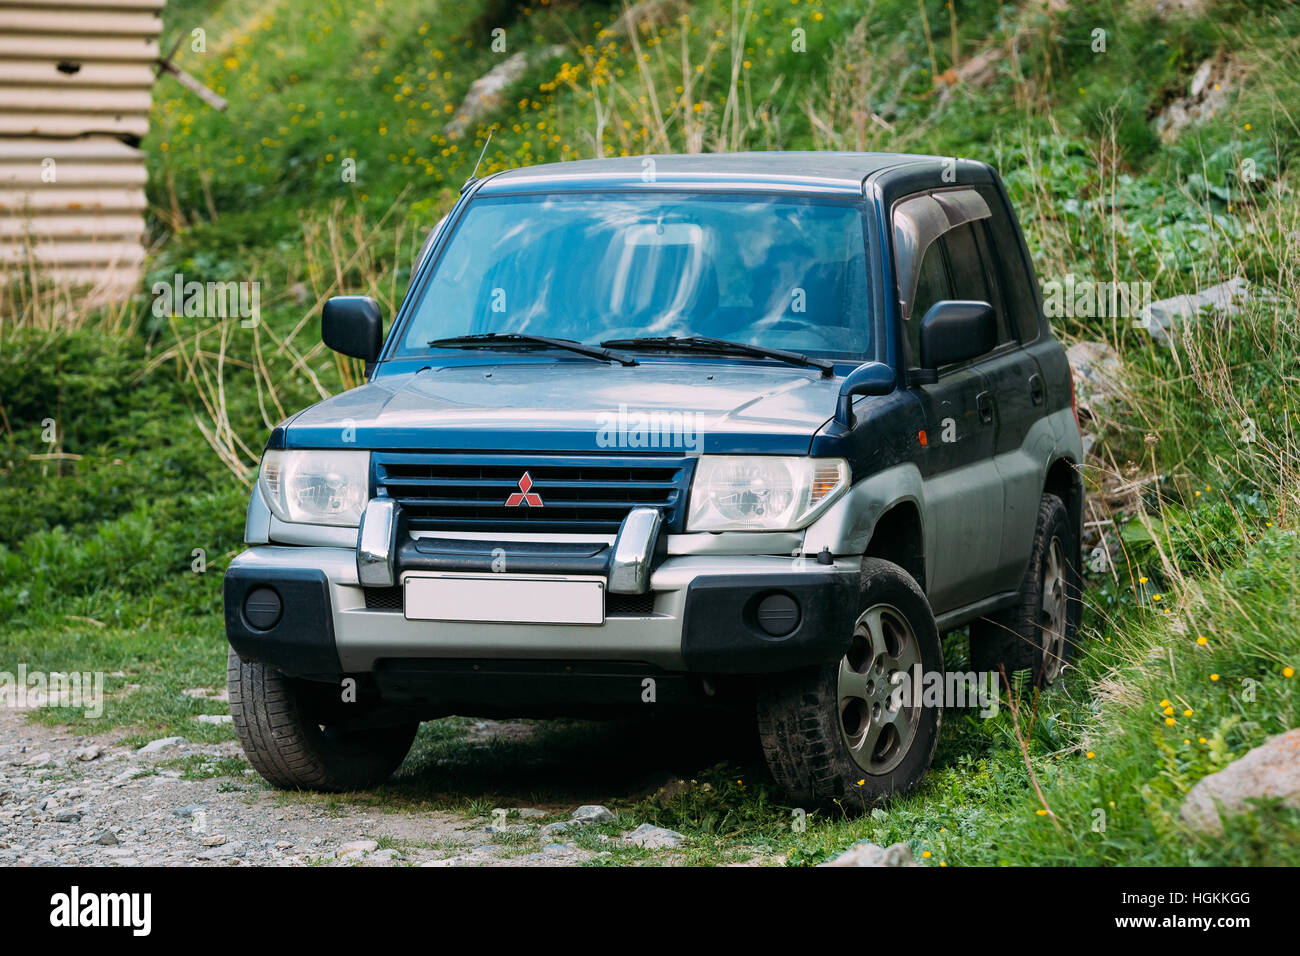 Darial Gorge, Georgia - May 21, 2016: Old Mitsubishi Montero Pajero SUV parking on road. Mitsubishi Pajero Sport is a mid-size SUV produced by the Jap Stock Photo